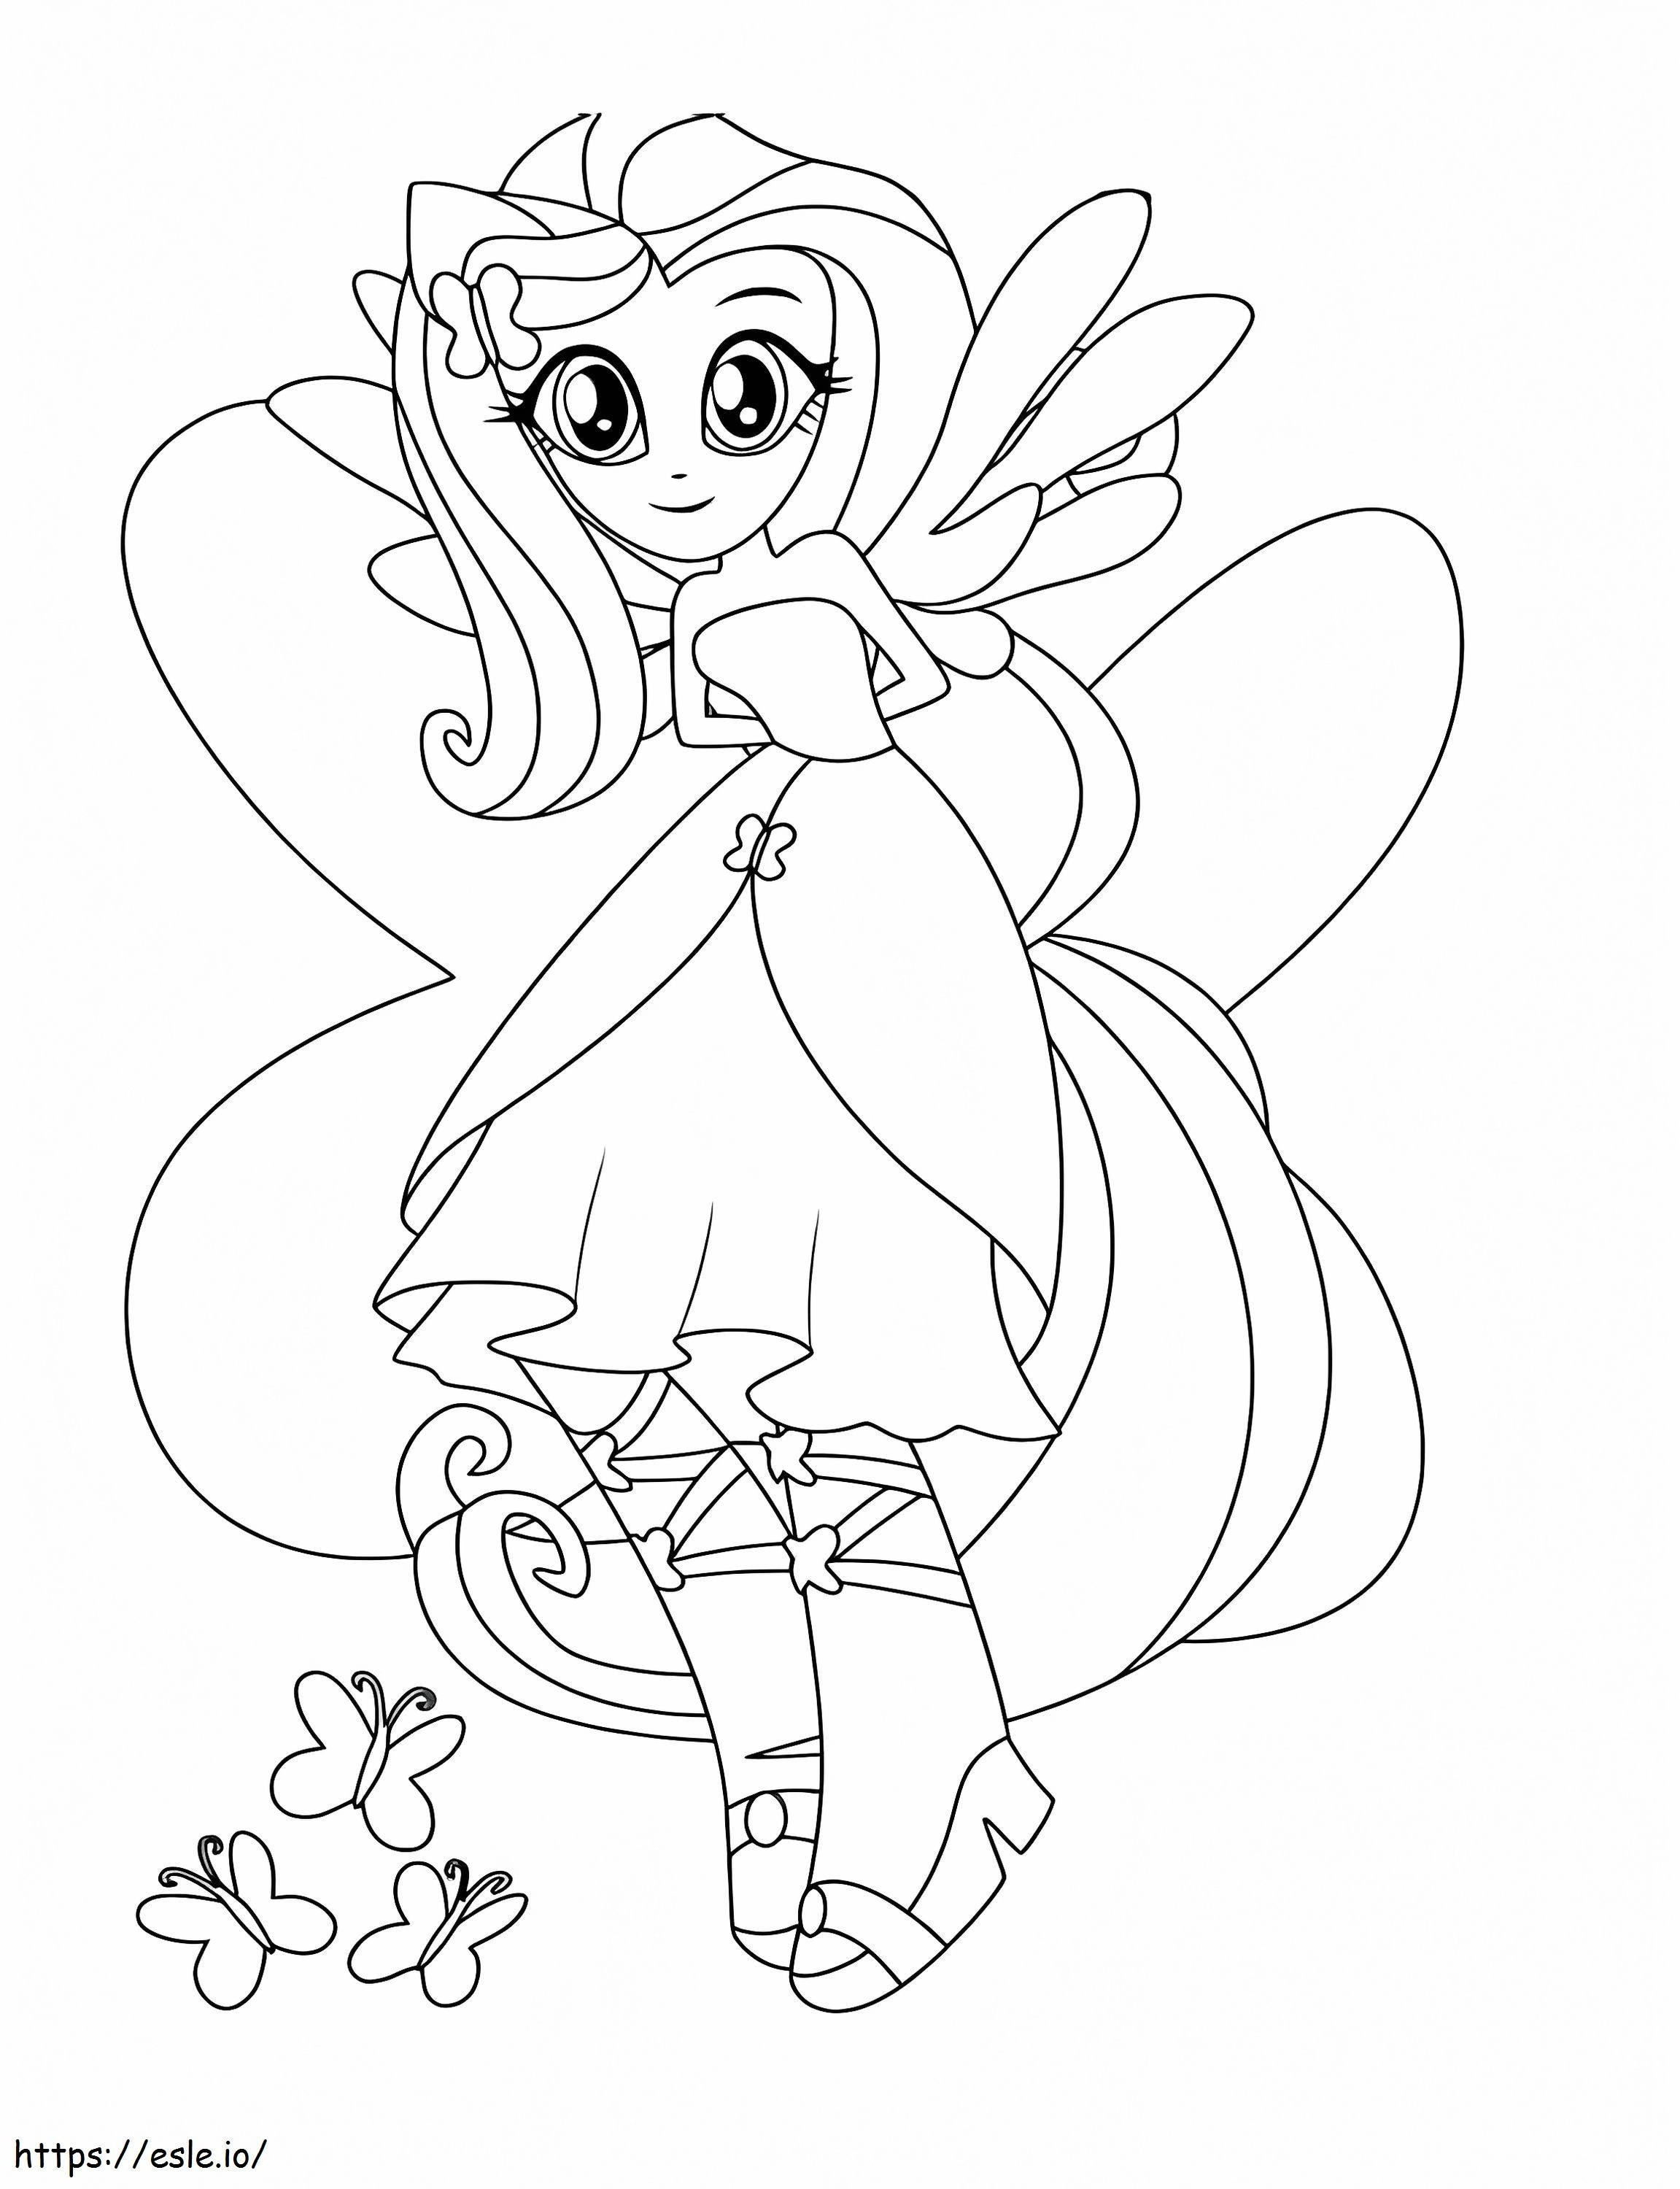 Equestria Girls 15 coloring page